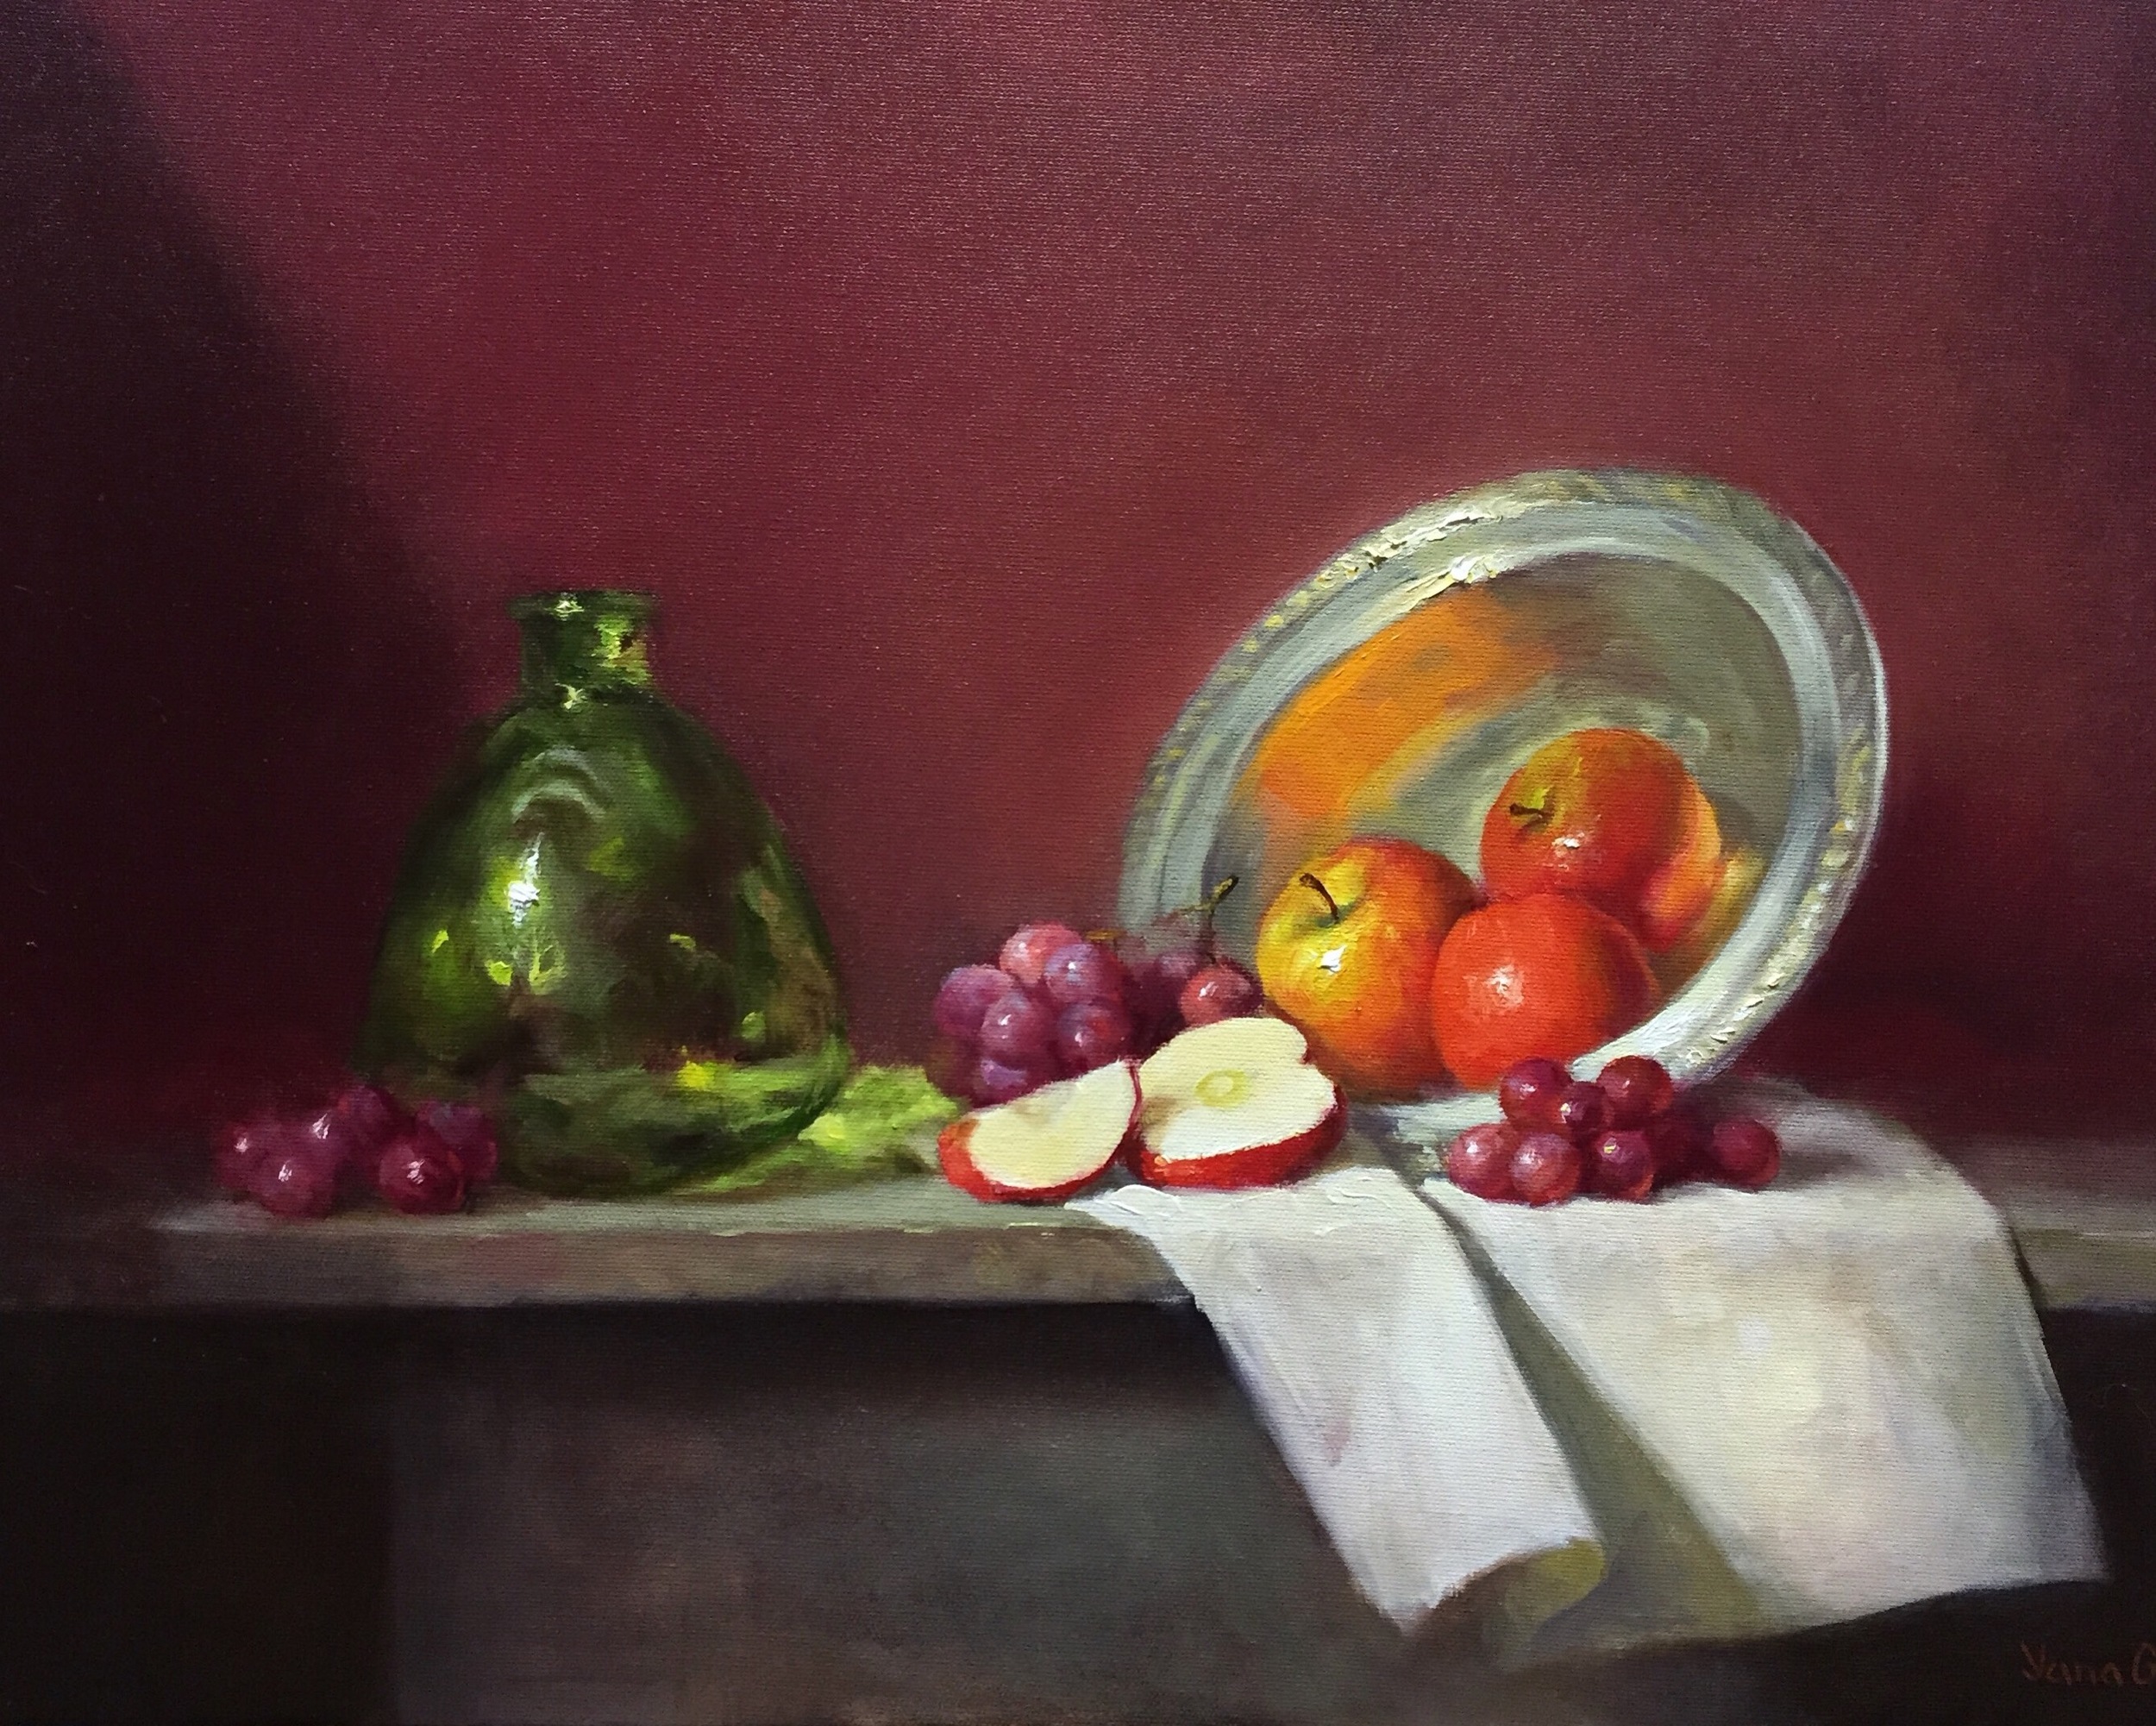 Apples and green bottle 16x20 Oil on canvas 